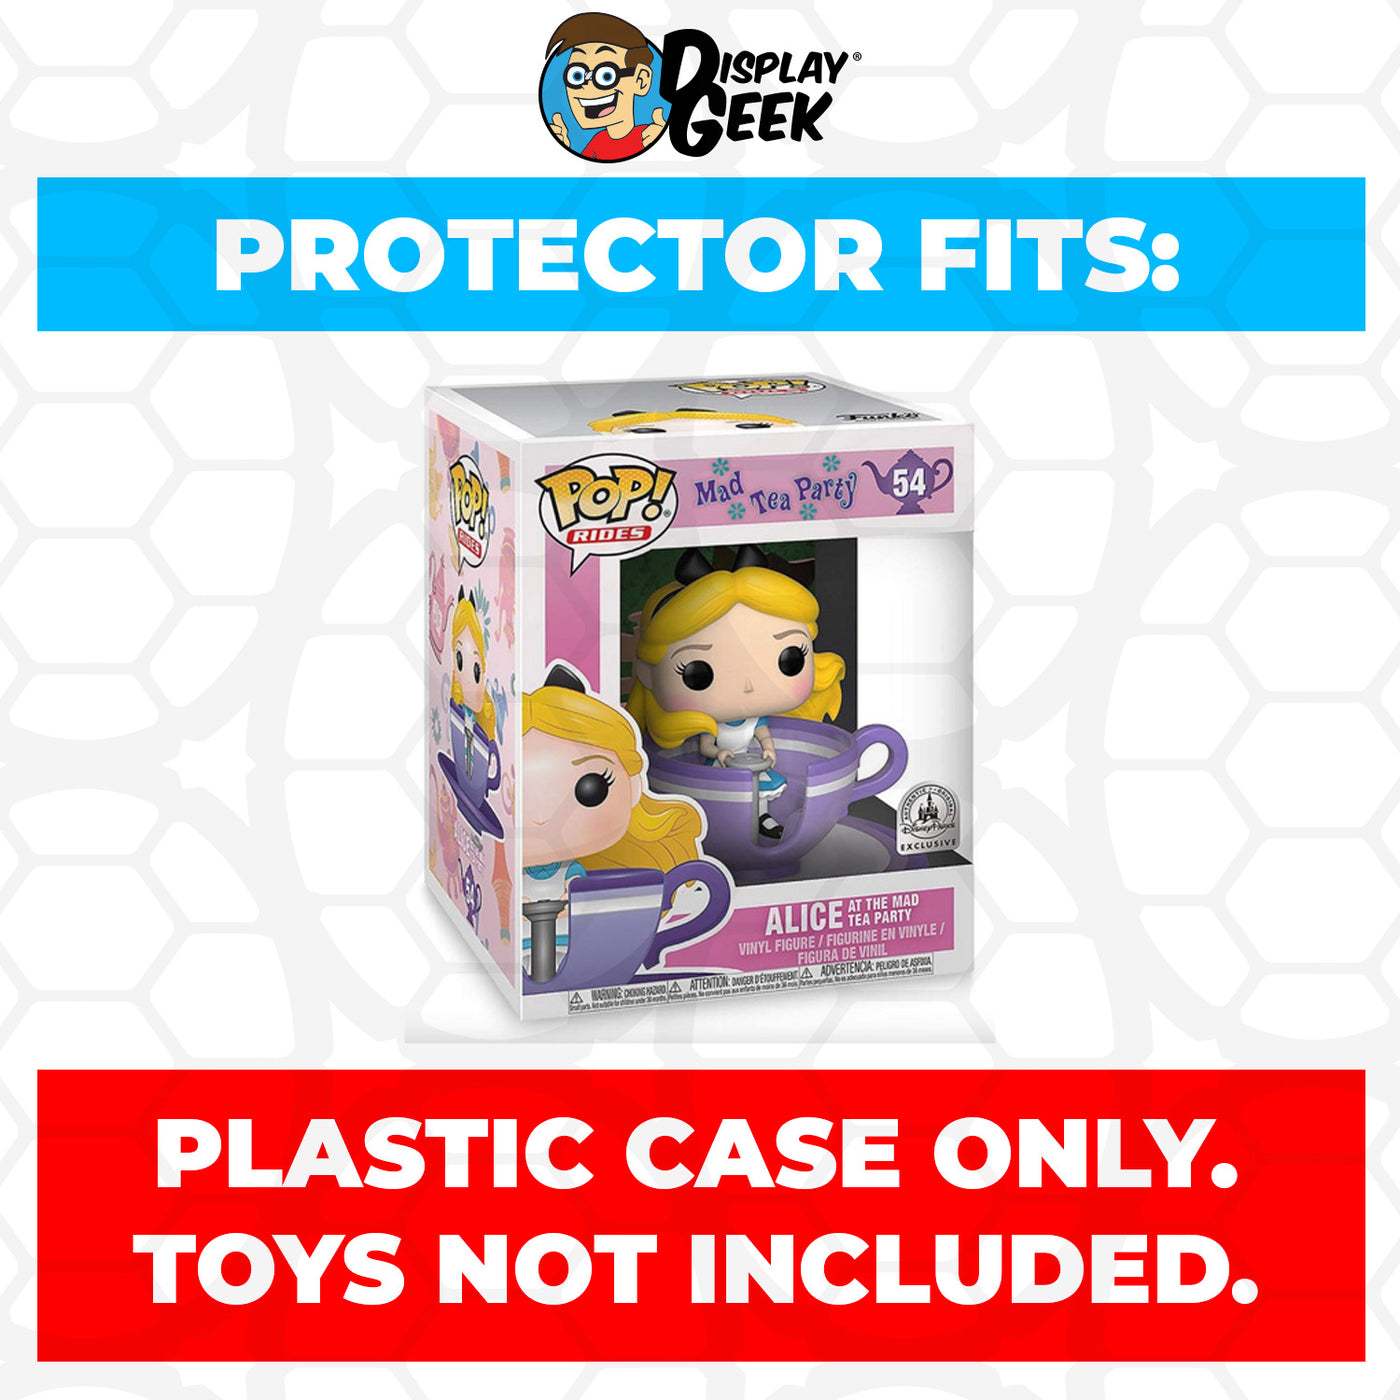 Pop Protector for Alice at the Mad Tea Party #54 Funko Pop Rides on The Protector Guide App by Display Geek